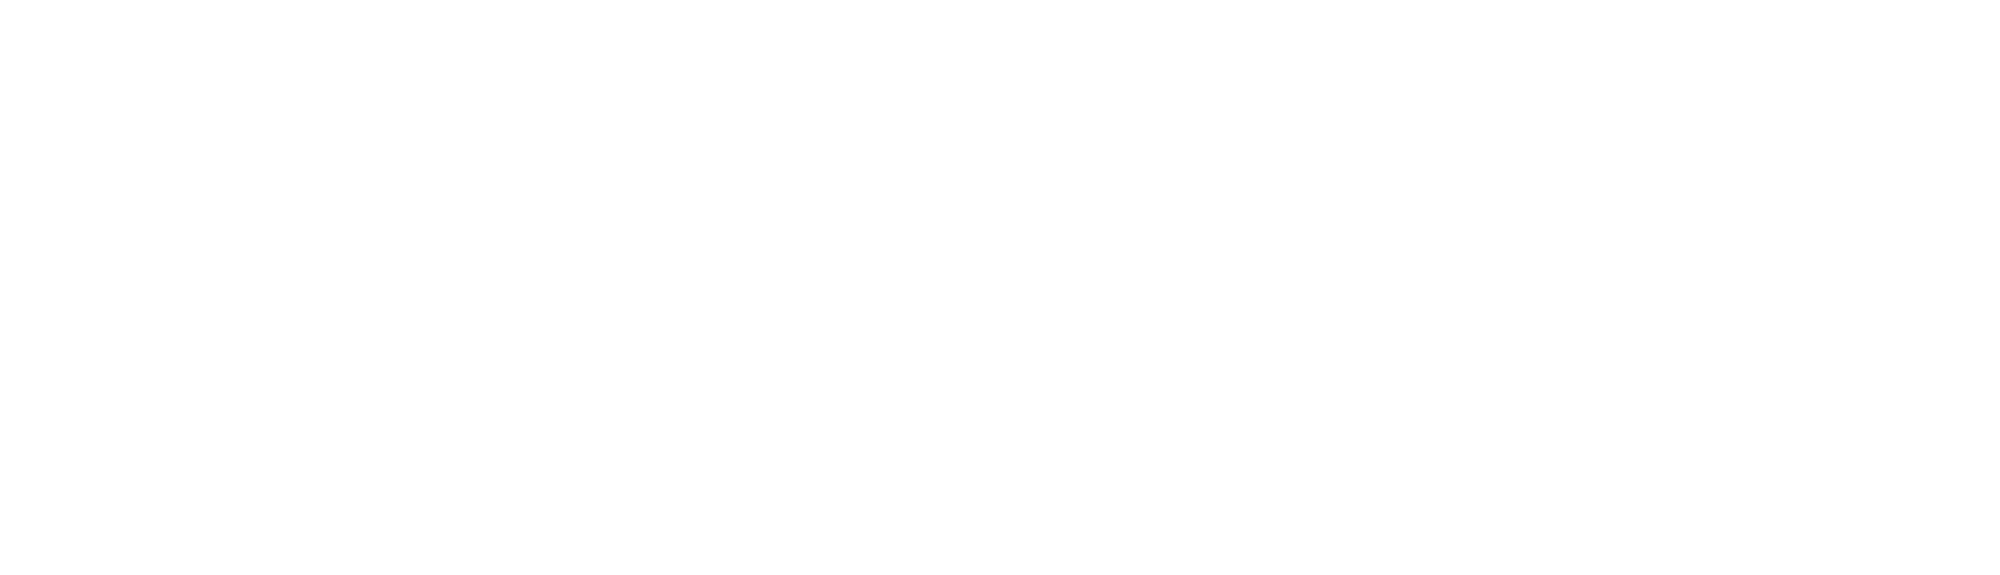 Meaning In Hindi